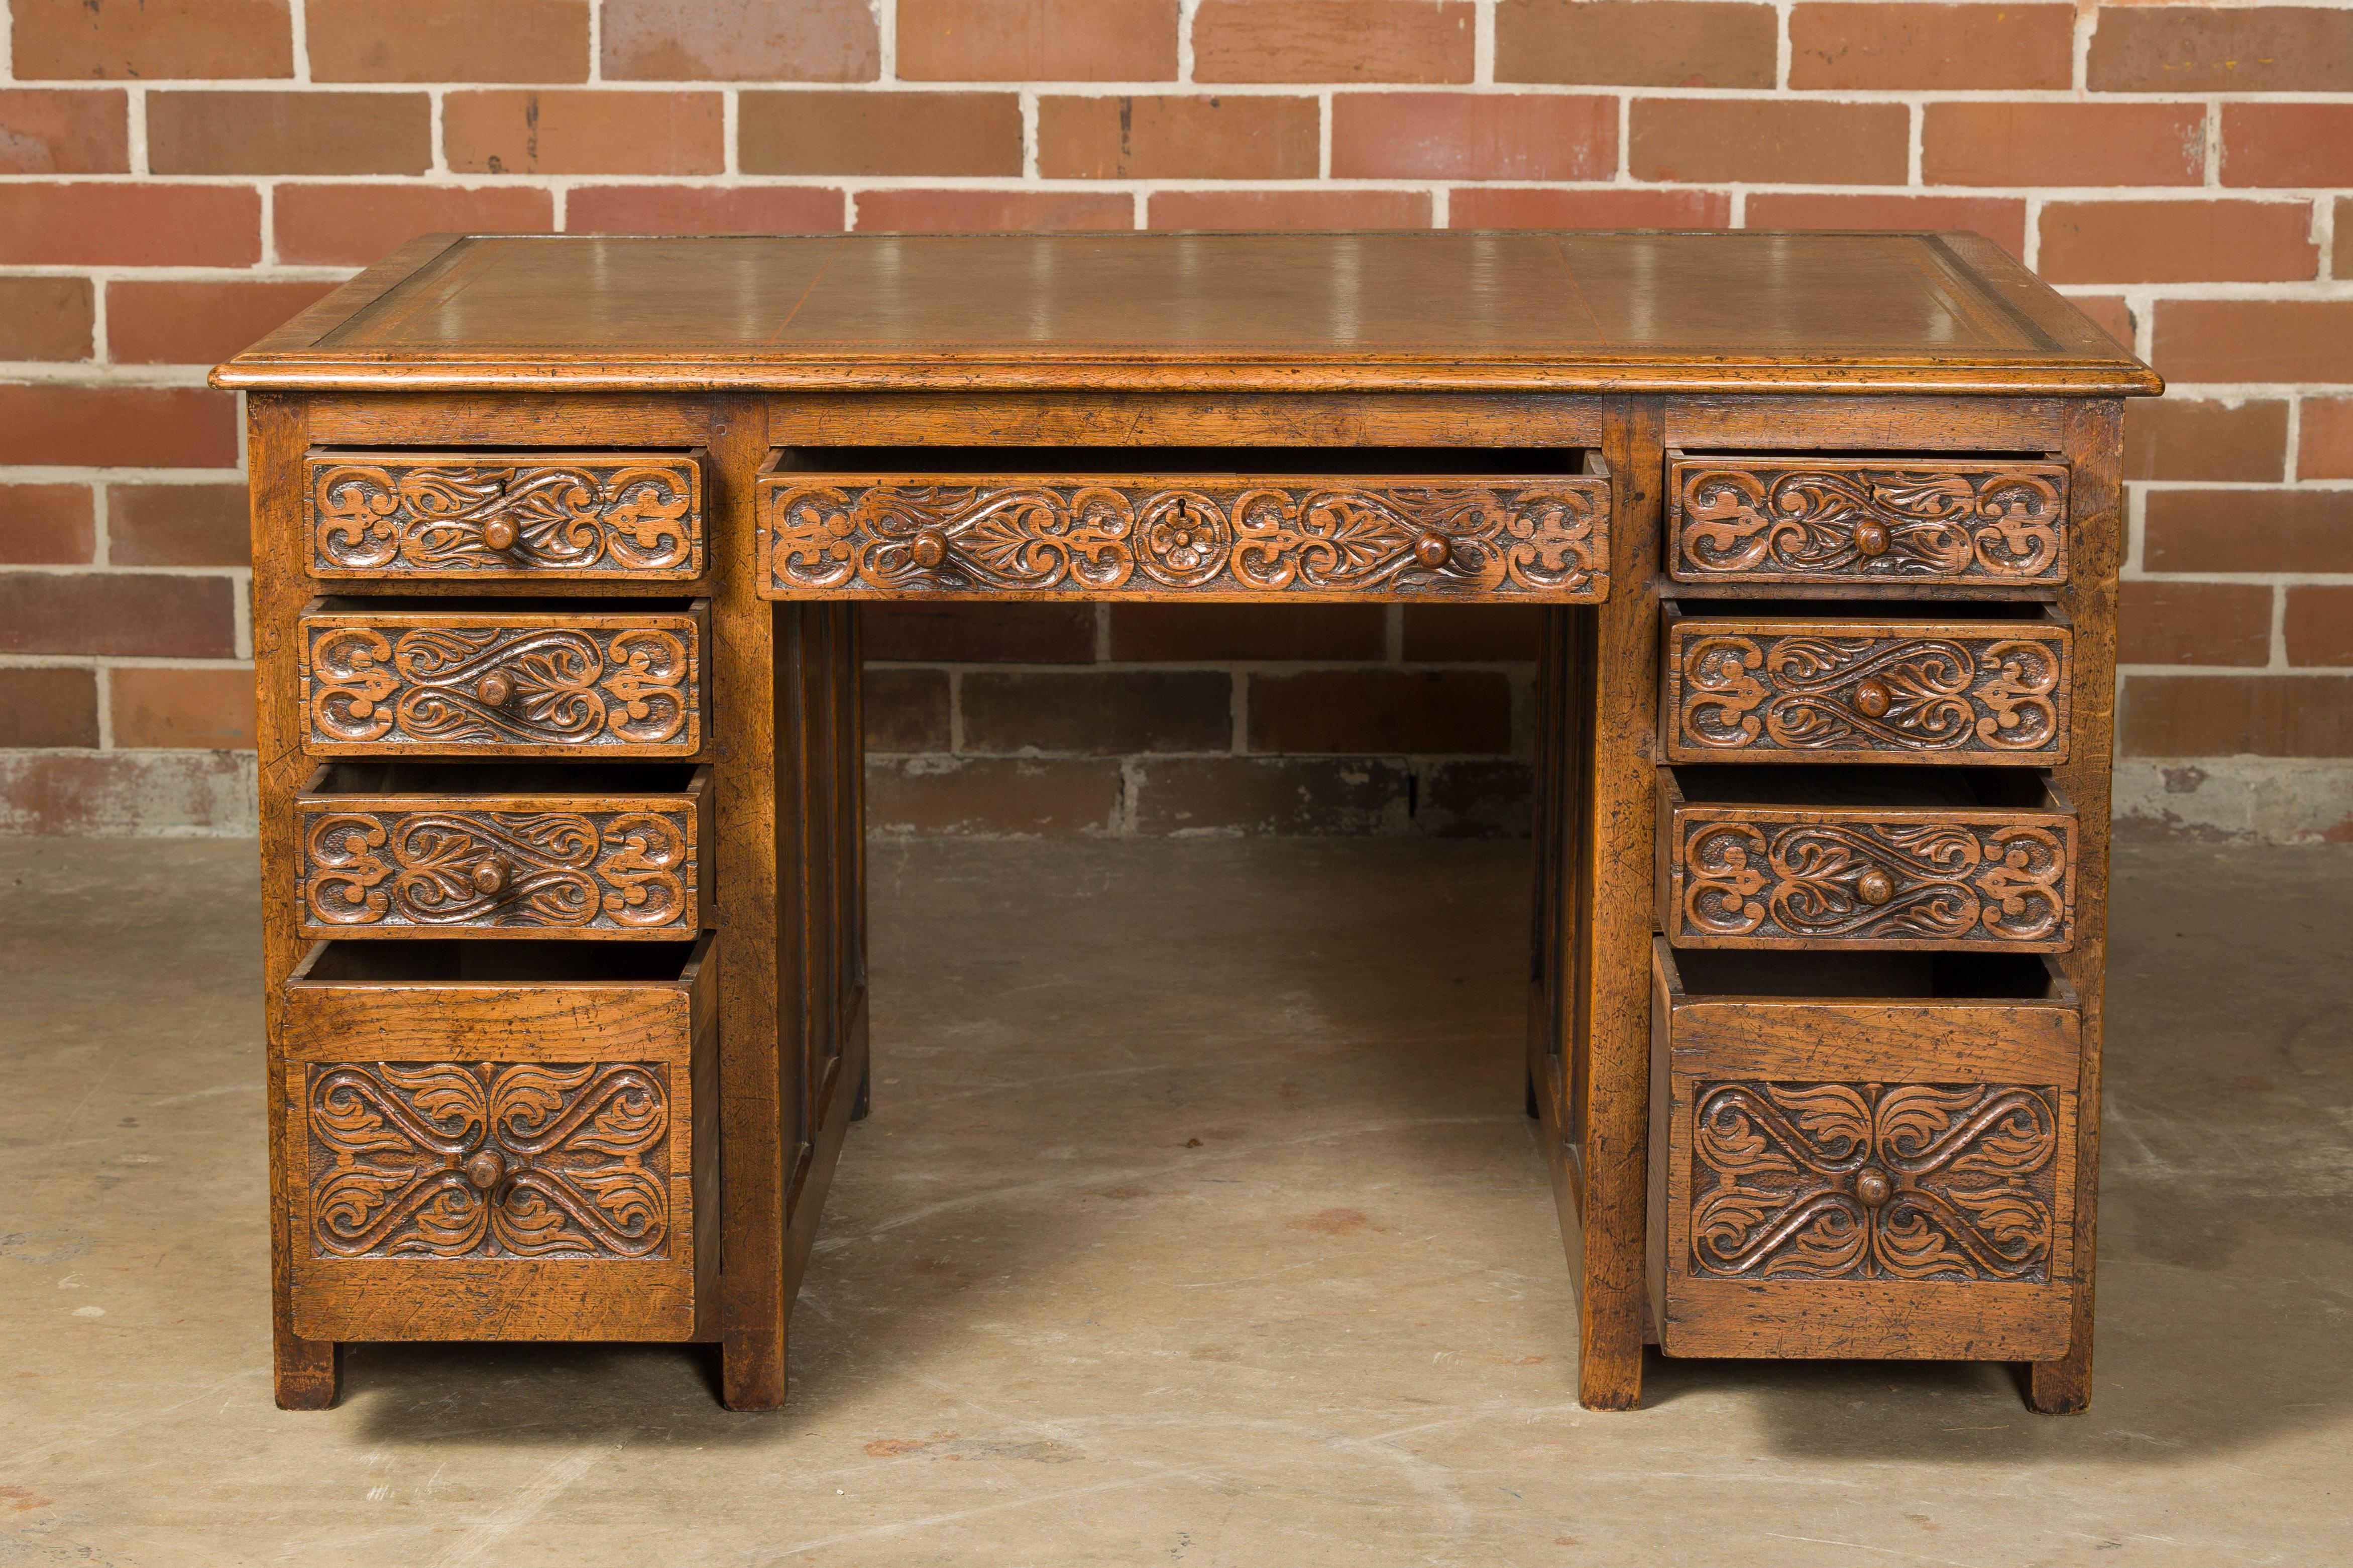 English 19th Century Oak Kneehole Desk with Nine Drawers and Carved Foliage In Good Condition For Sale In Atlanta, GA